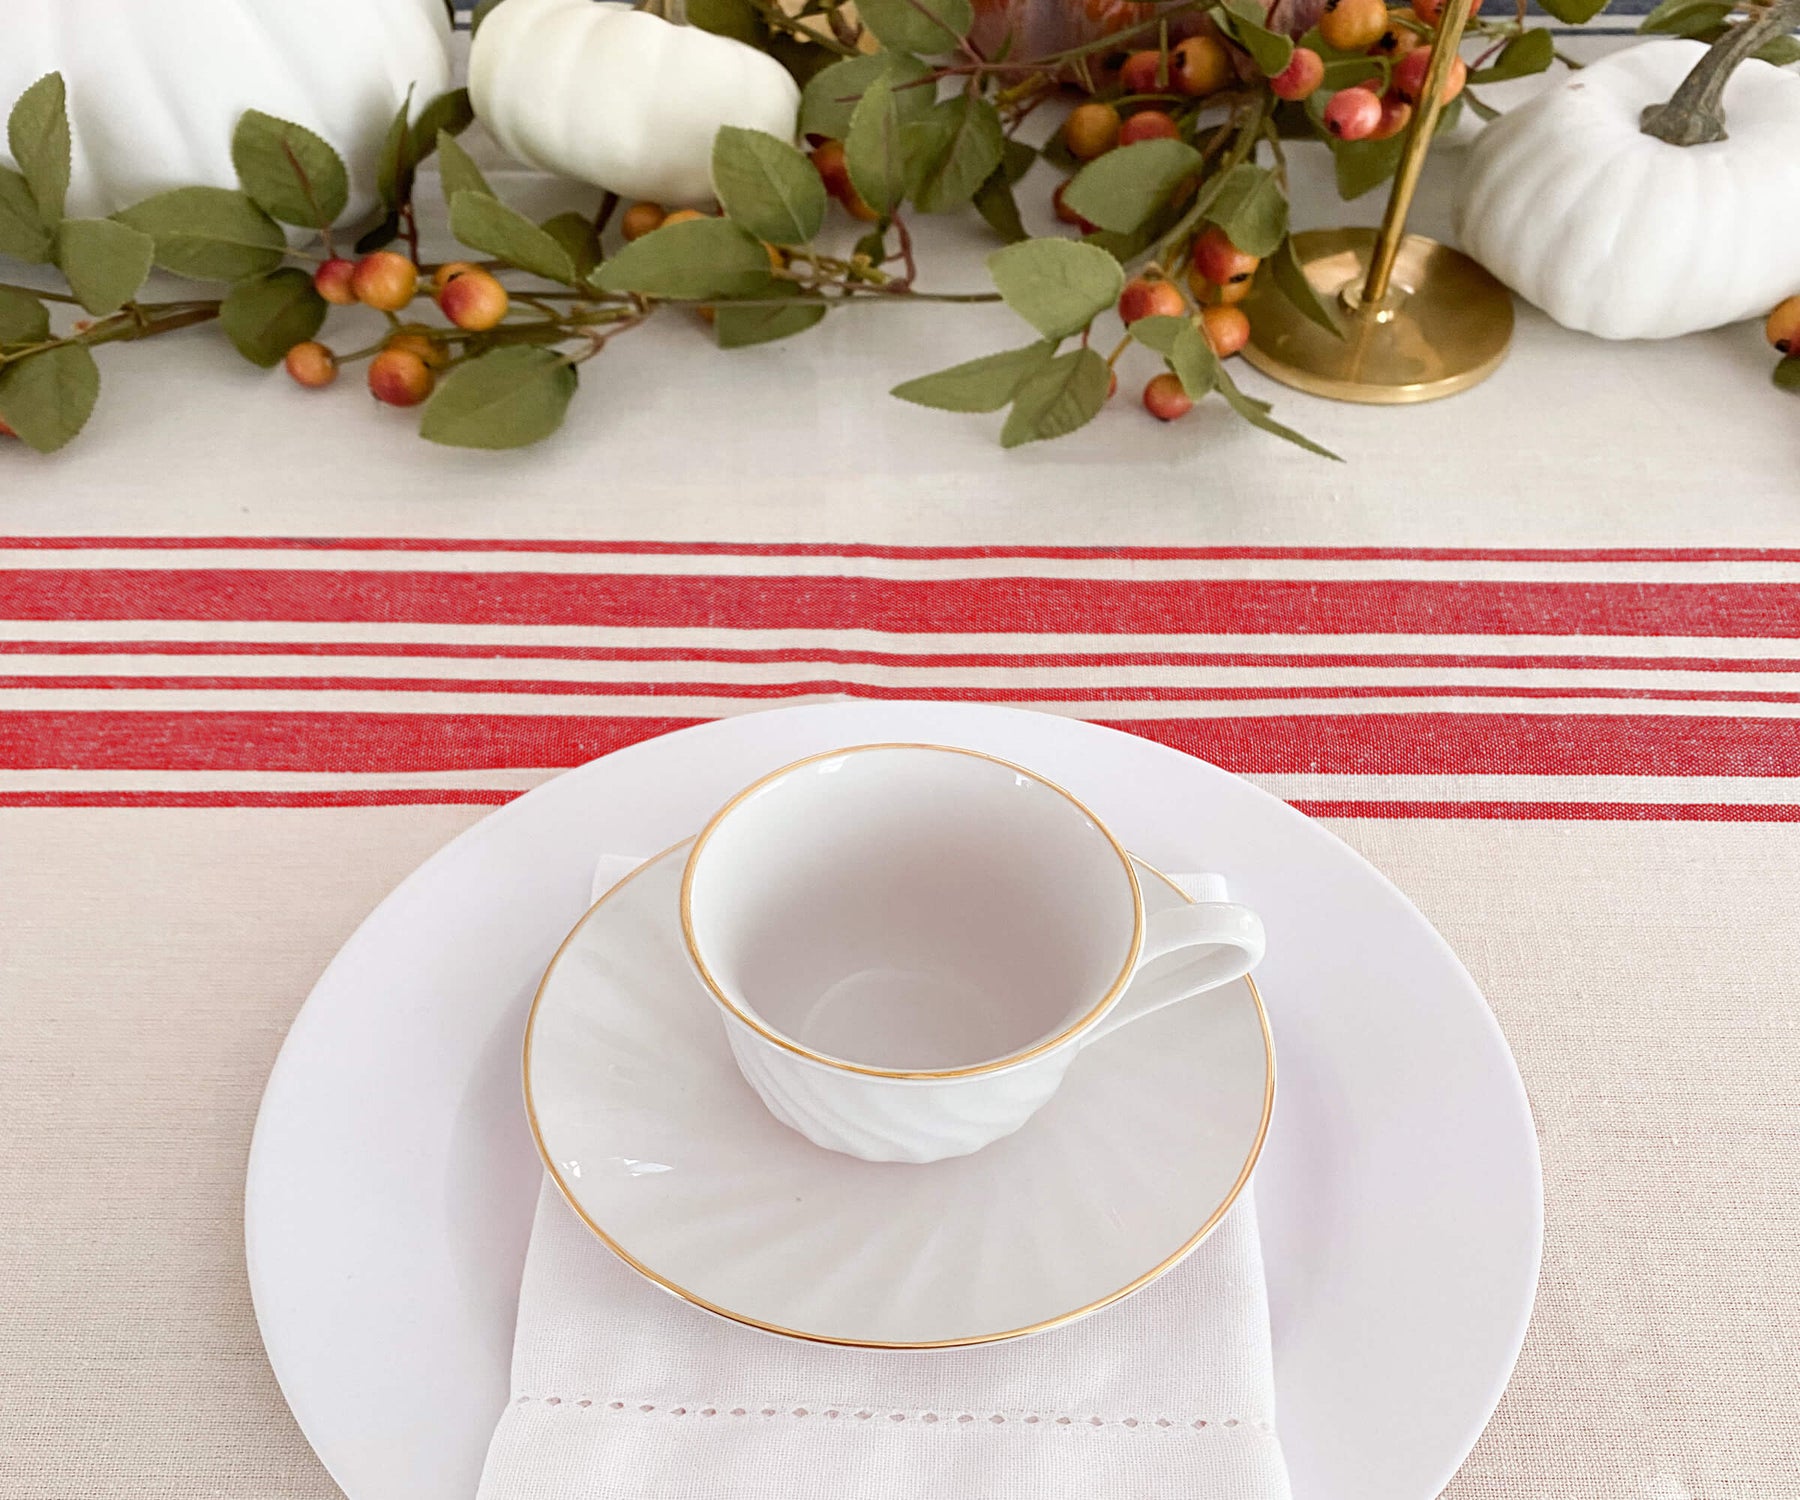 Table setting featuring a white plate, gold cup, and a red and white striped farmhouse tablecloth